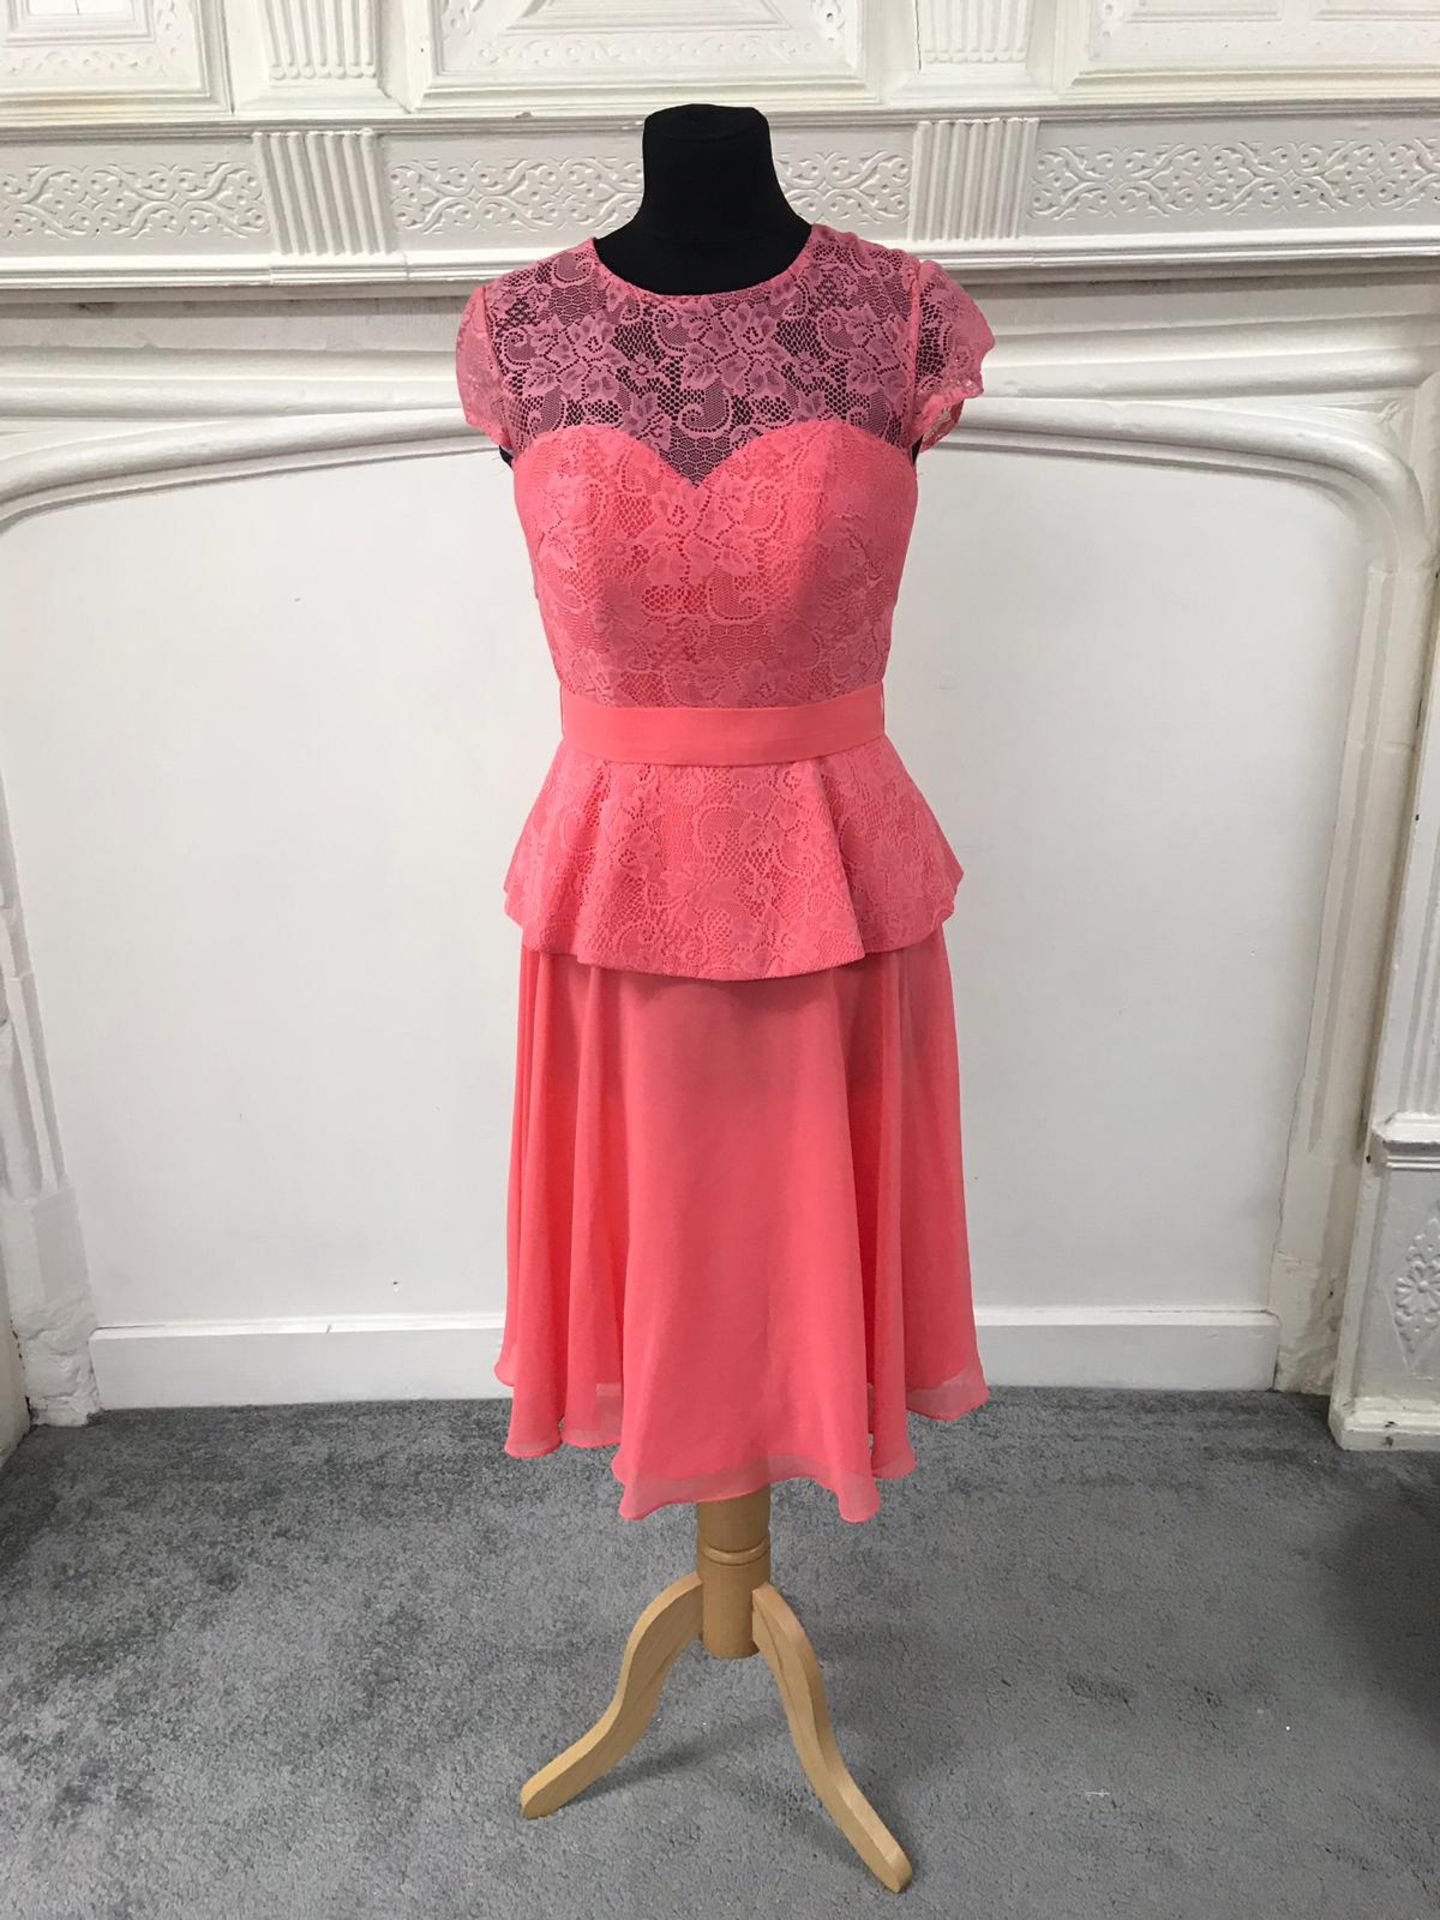 Short Coral Dress Size 6 Lace top - Image 2 of 4